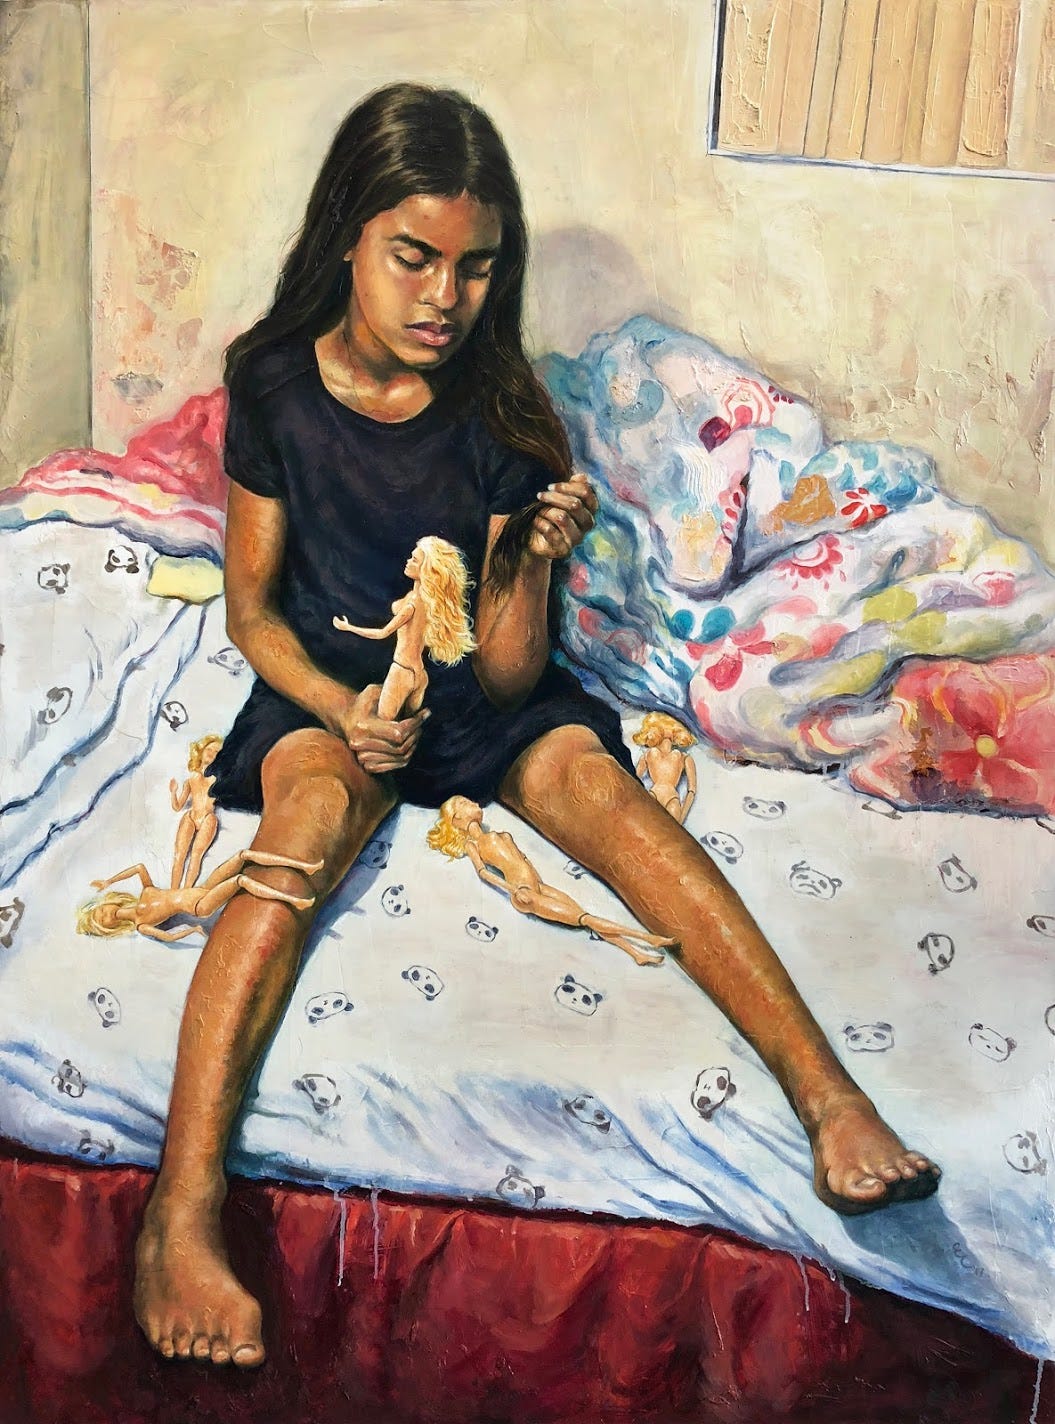 Painting of a girl playing with dolls in her bed